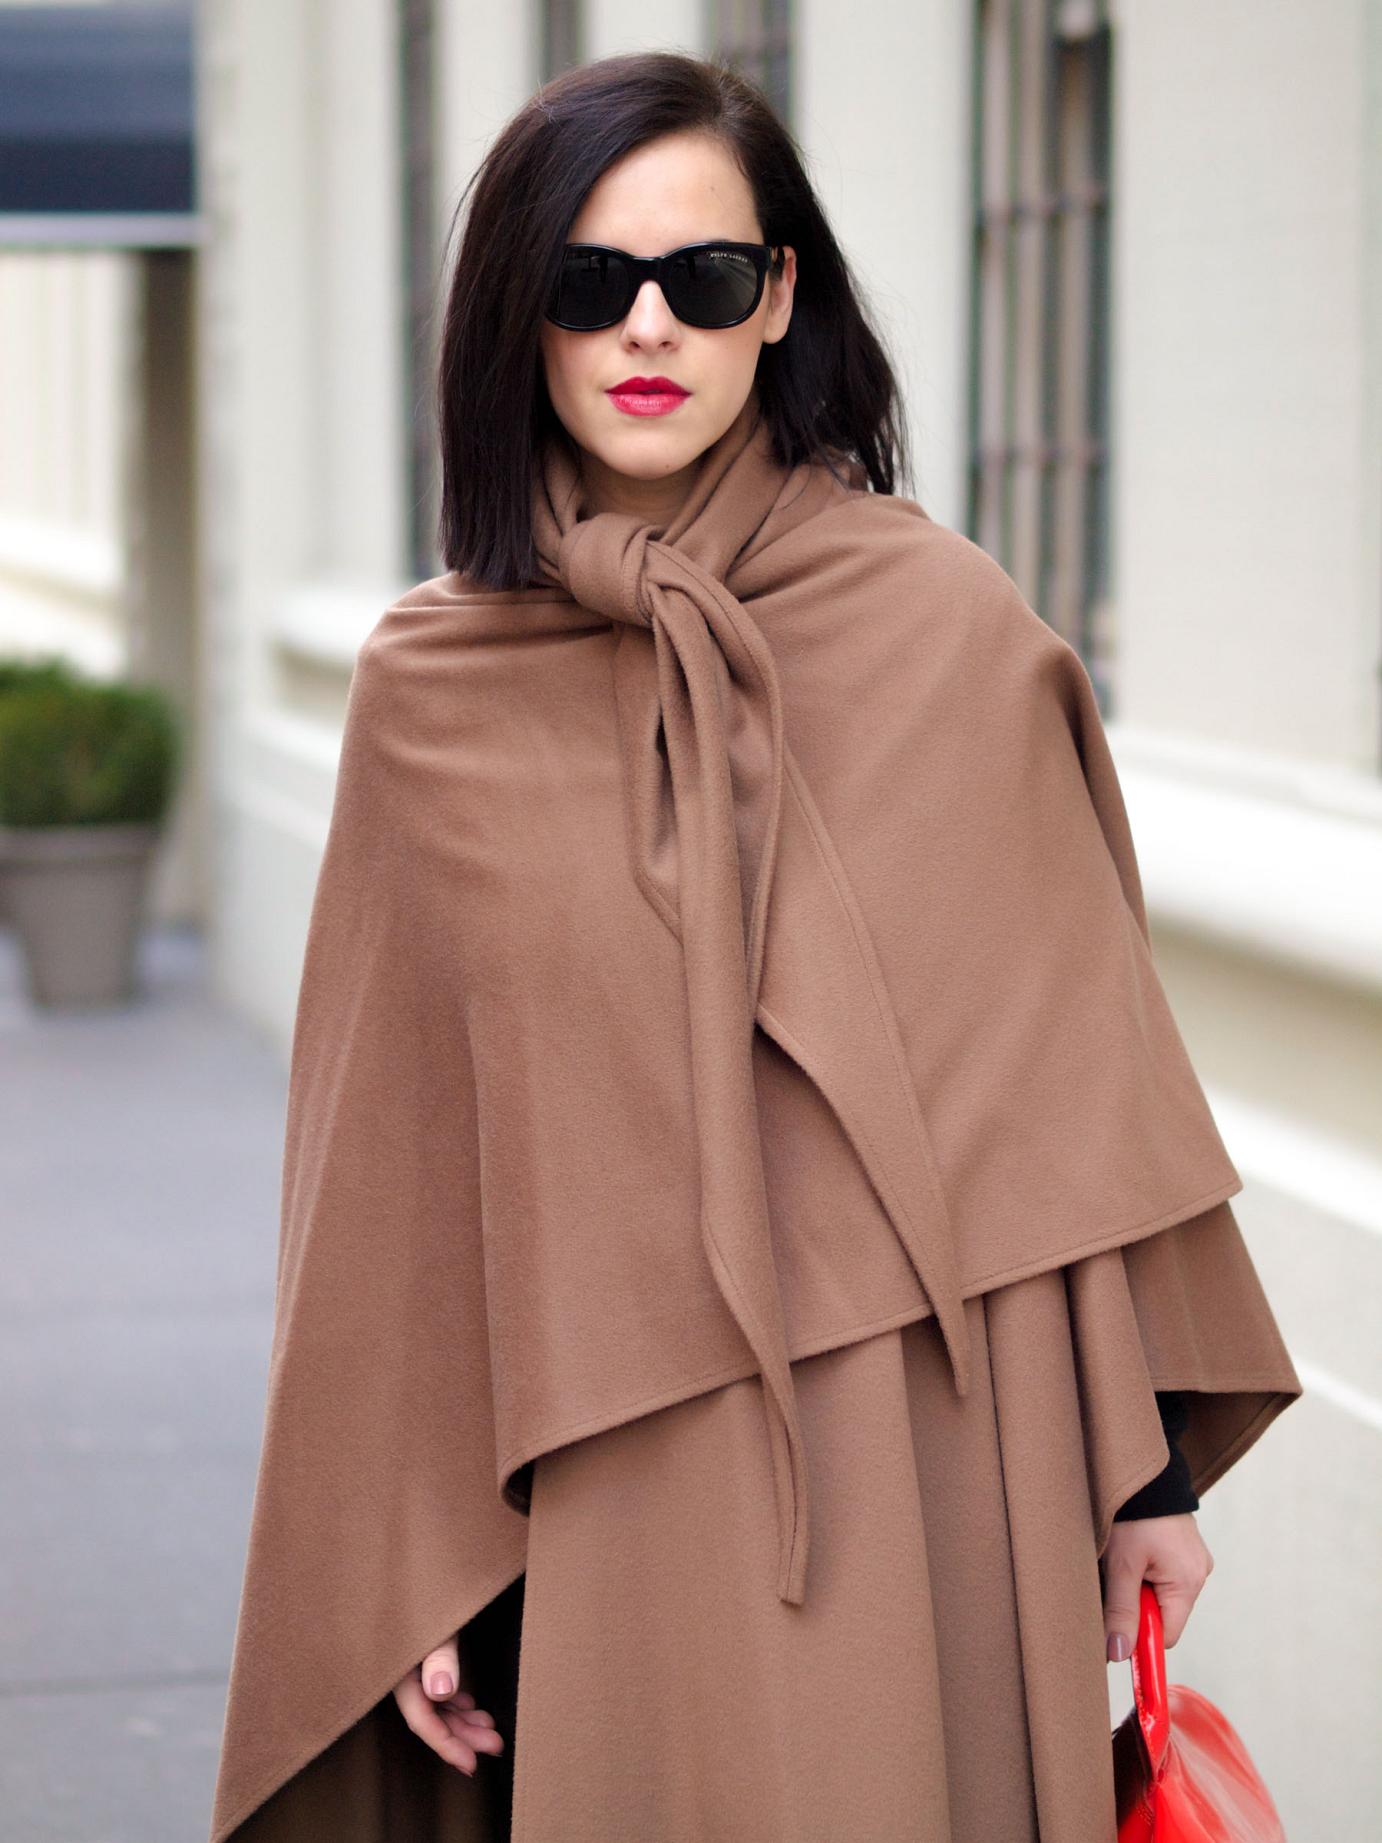 bittersweet colours, street style, winter coats, cape, benetton boots, 3.1 phillip lim bag, winter street style, maternity style, 27 weeks, New York, leather leggings, camel cape 